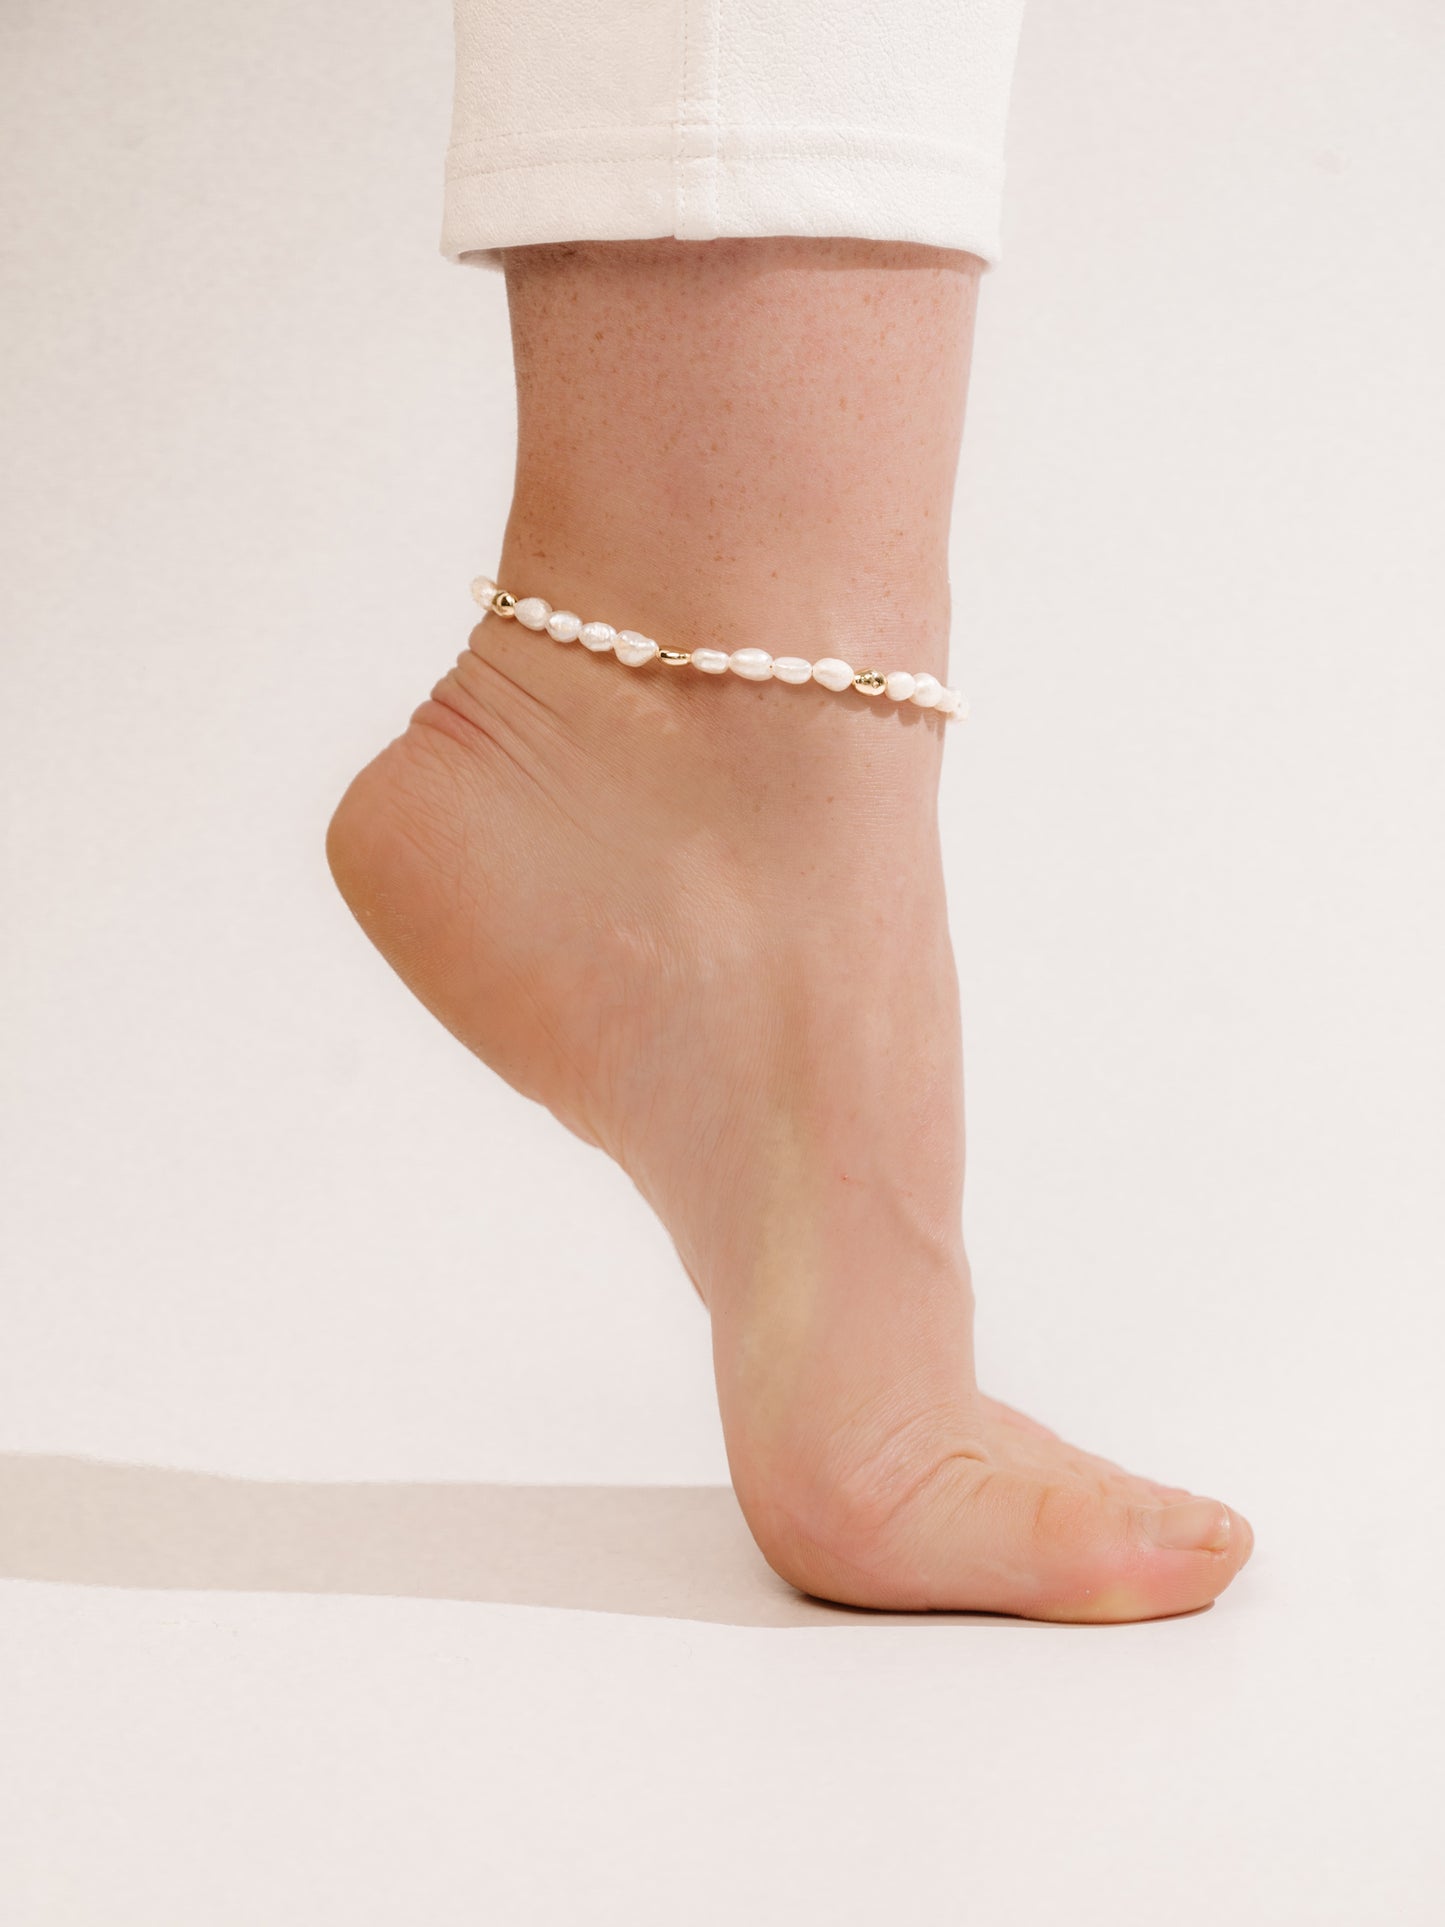 Freshwater Pearl Polished Pebble Beaded Anklet on model